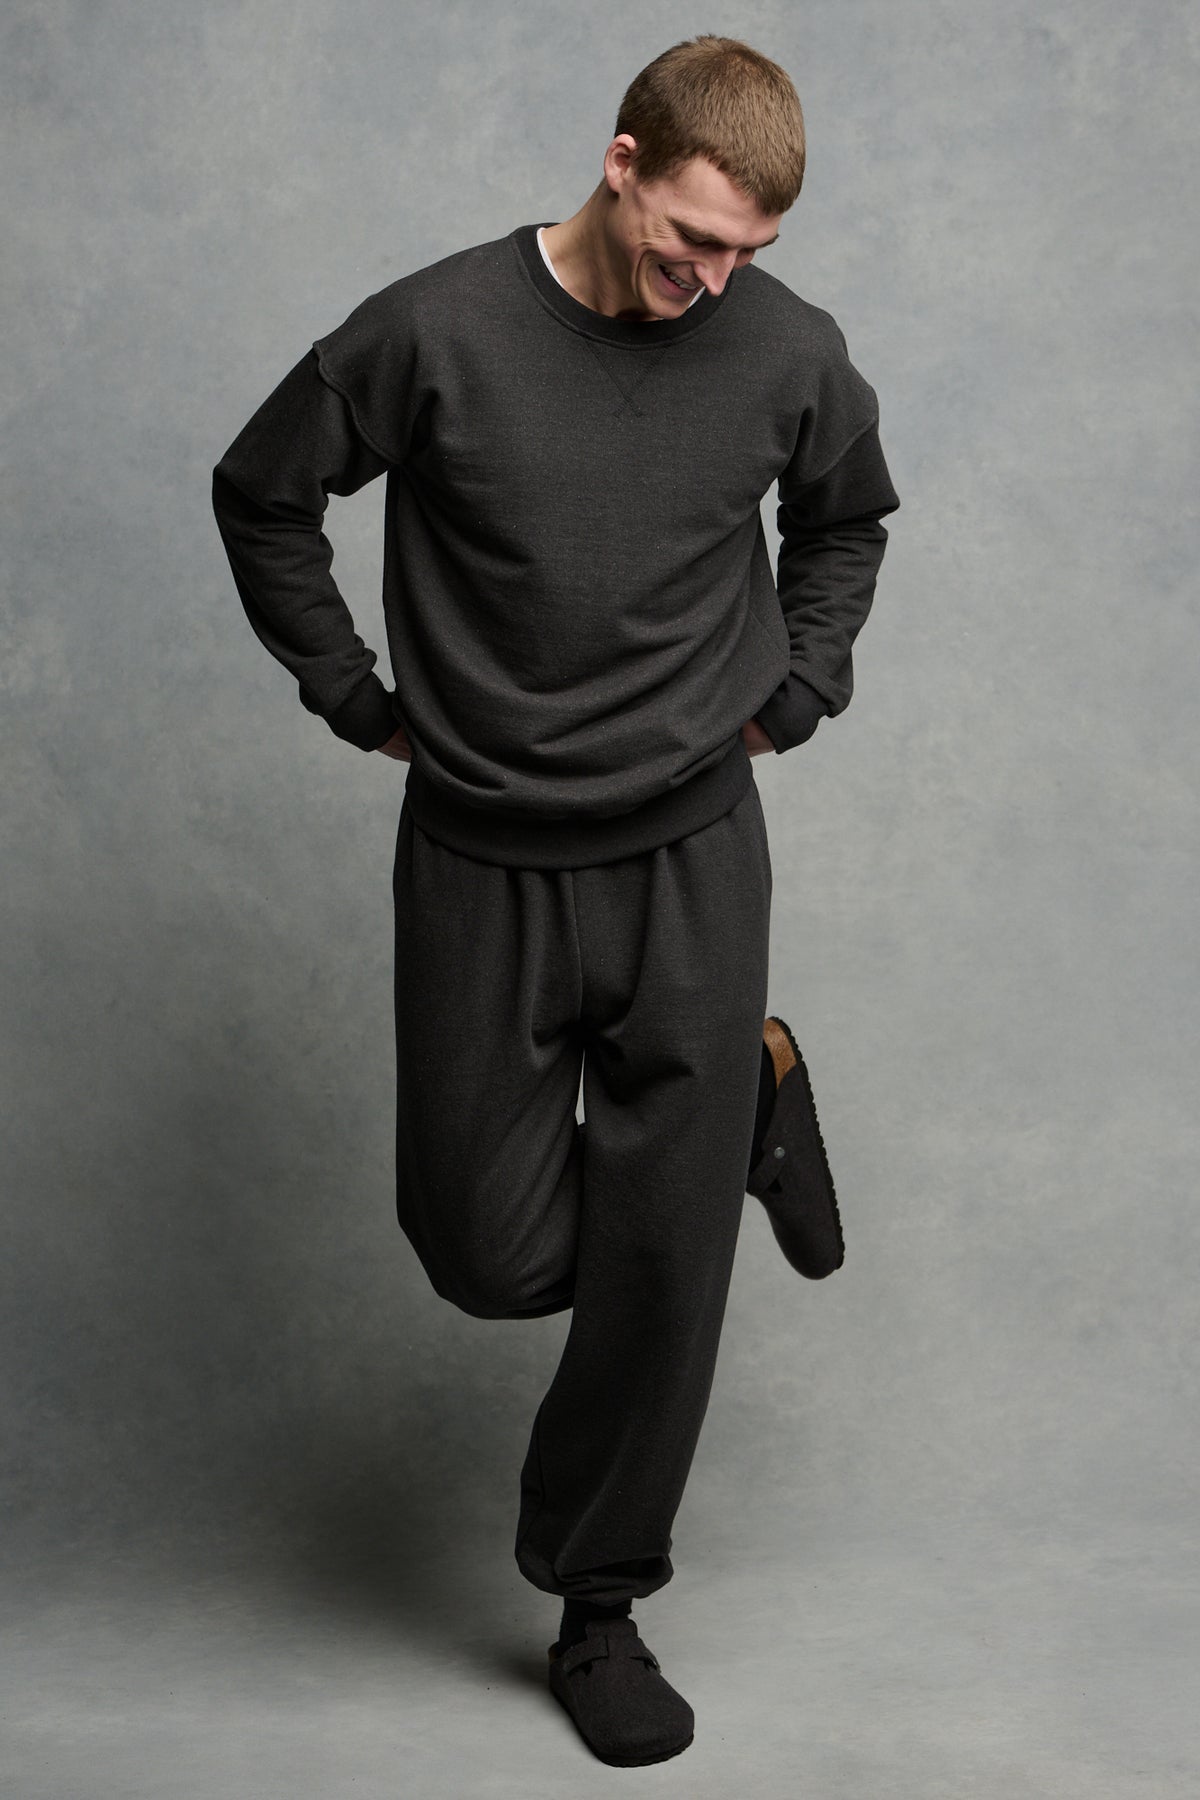 
            Full body image of smiley male looking down to ground wearing matching heritage sweatpants and sweatshirt